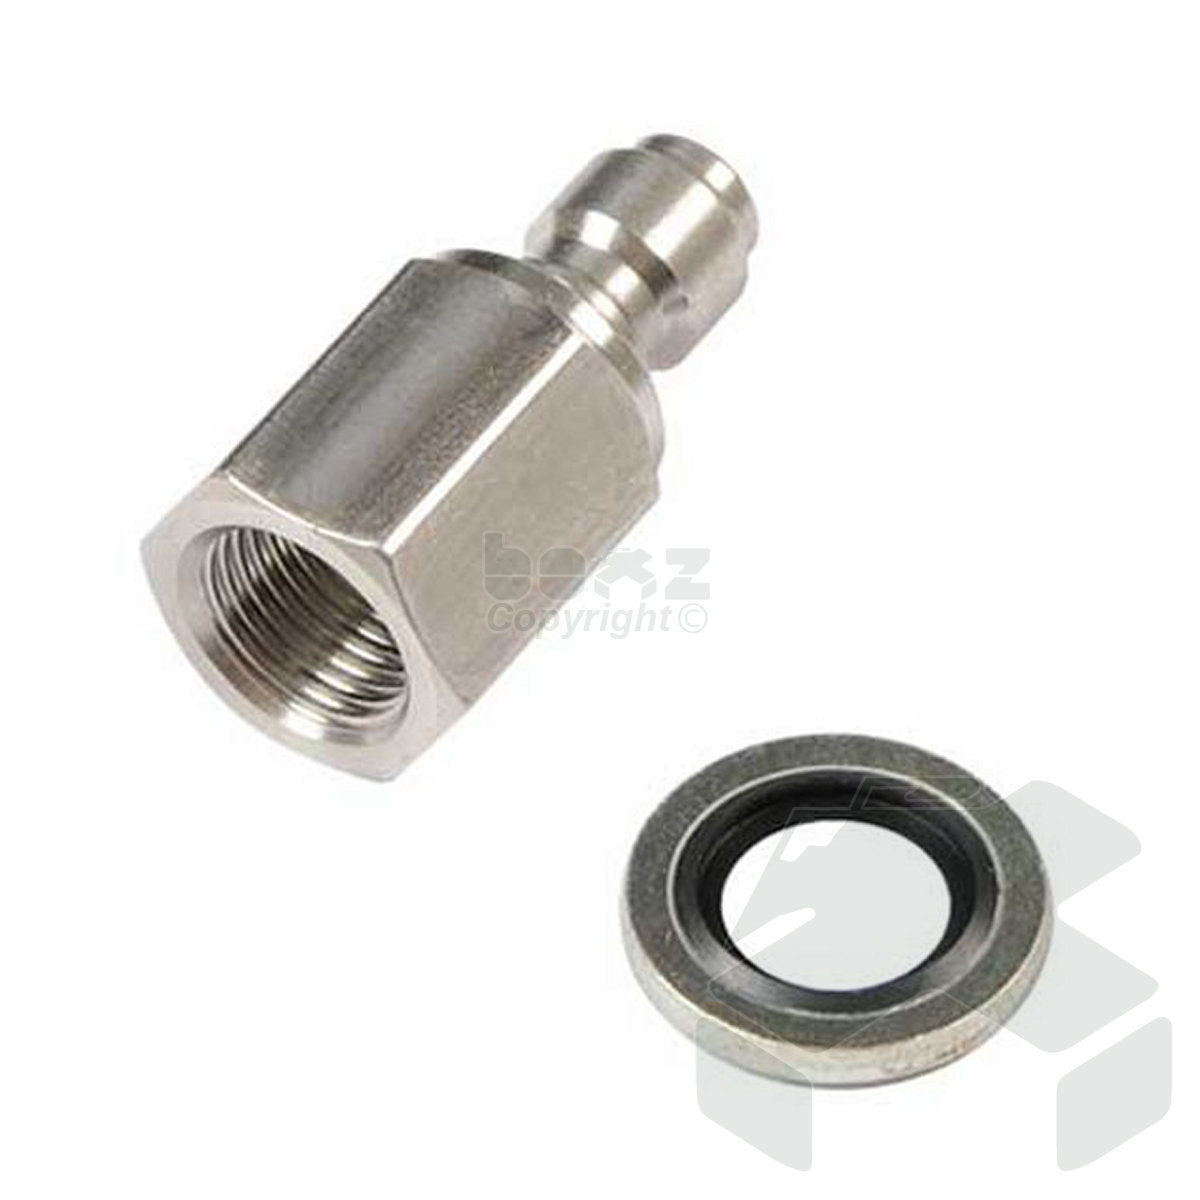 BEST Fittings Quick Coupler Plug - 1/8 BSP Snap On Connector PCP Air Rifles